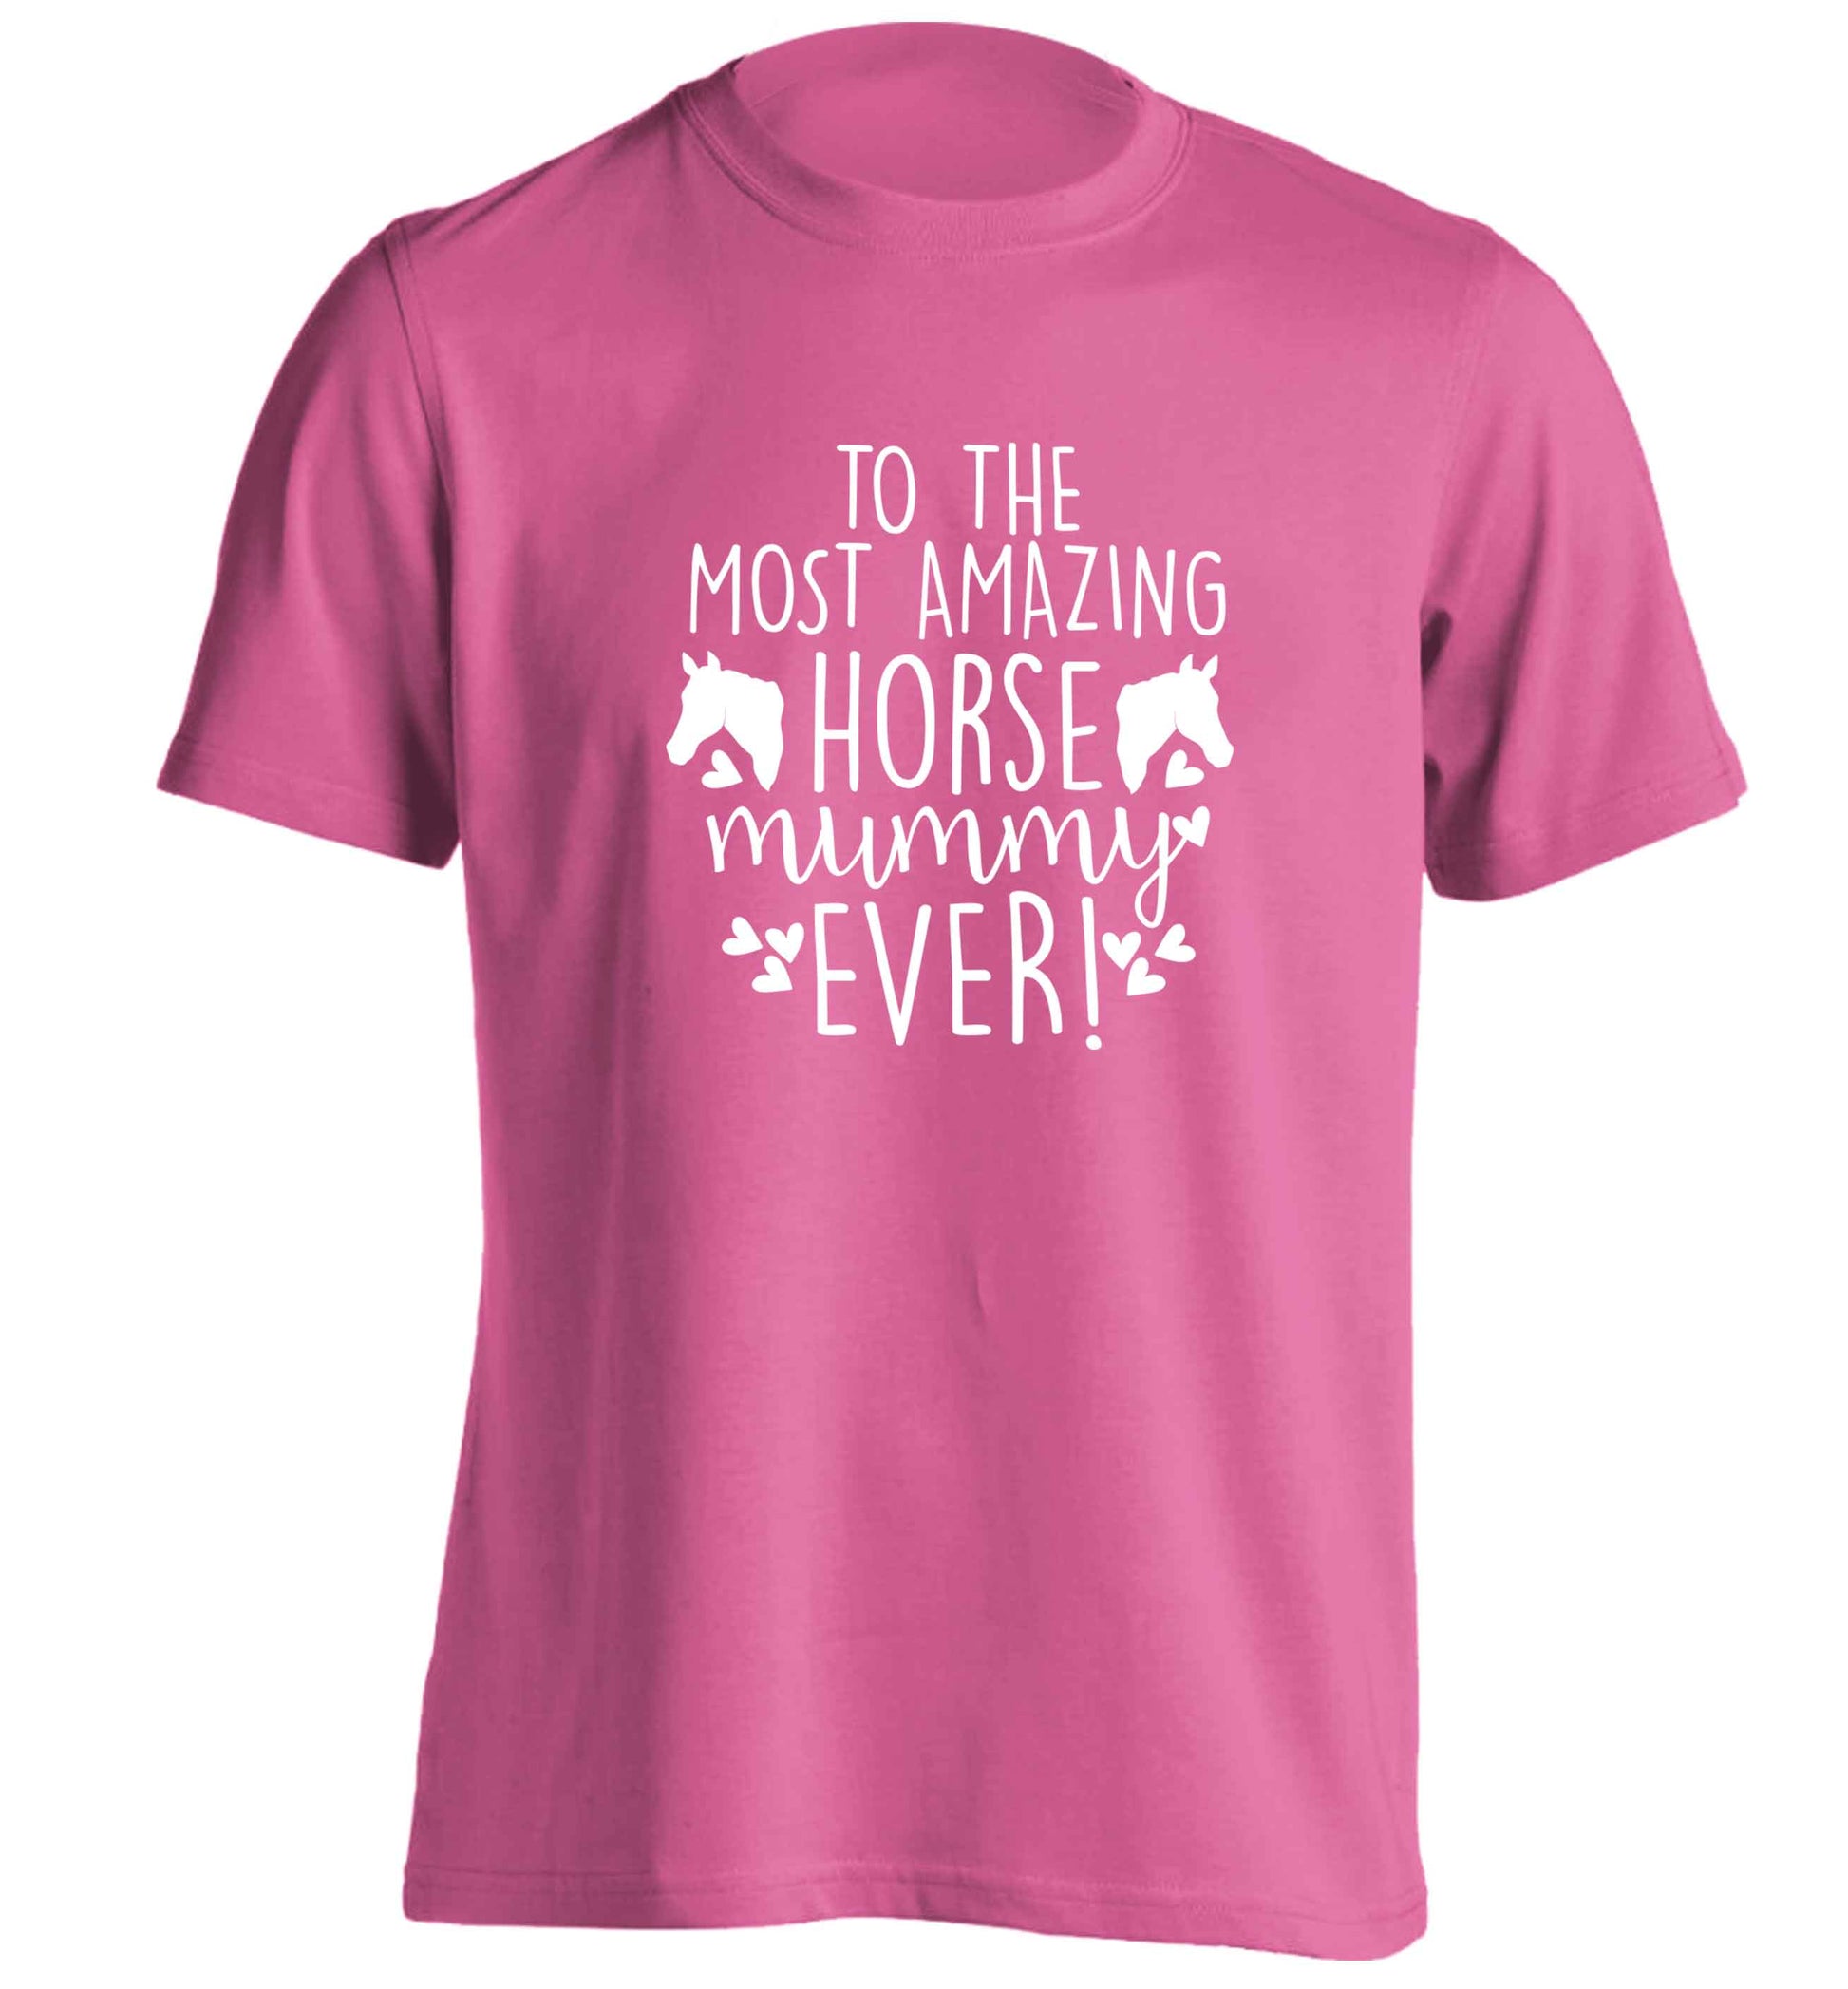 To the most amazing horse mummy ever! adults unisex pink Tshirt 2XL